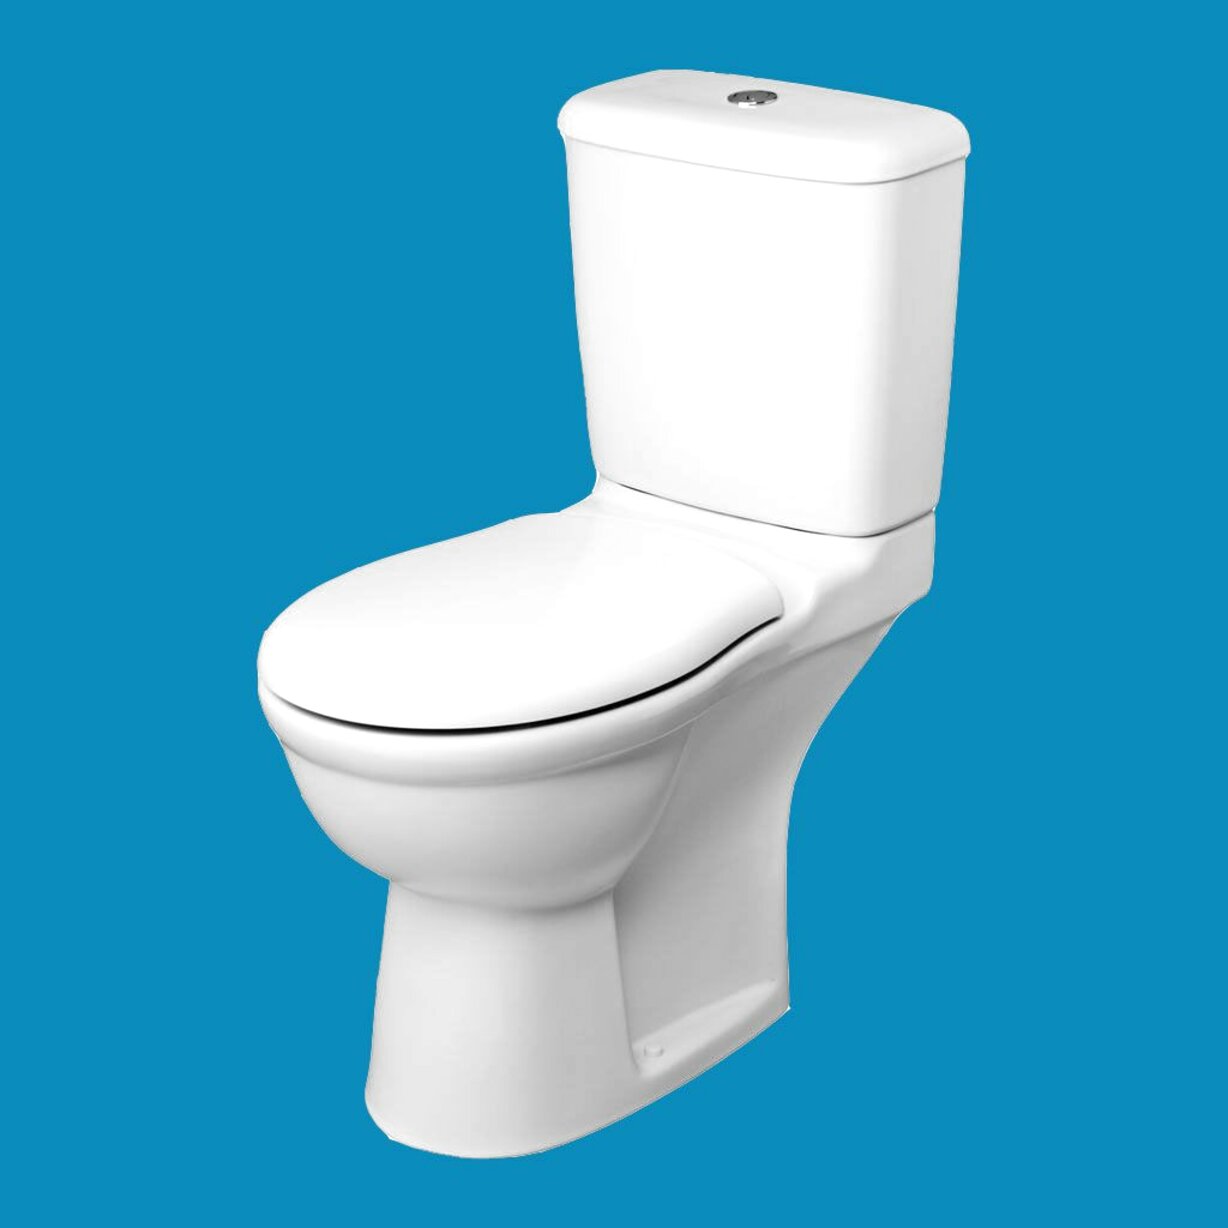 Ideal Standard Toilet Seats for sale in UK | 44 used Ideal Standard